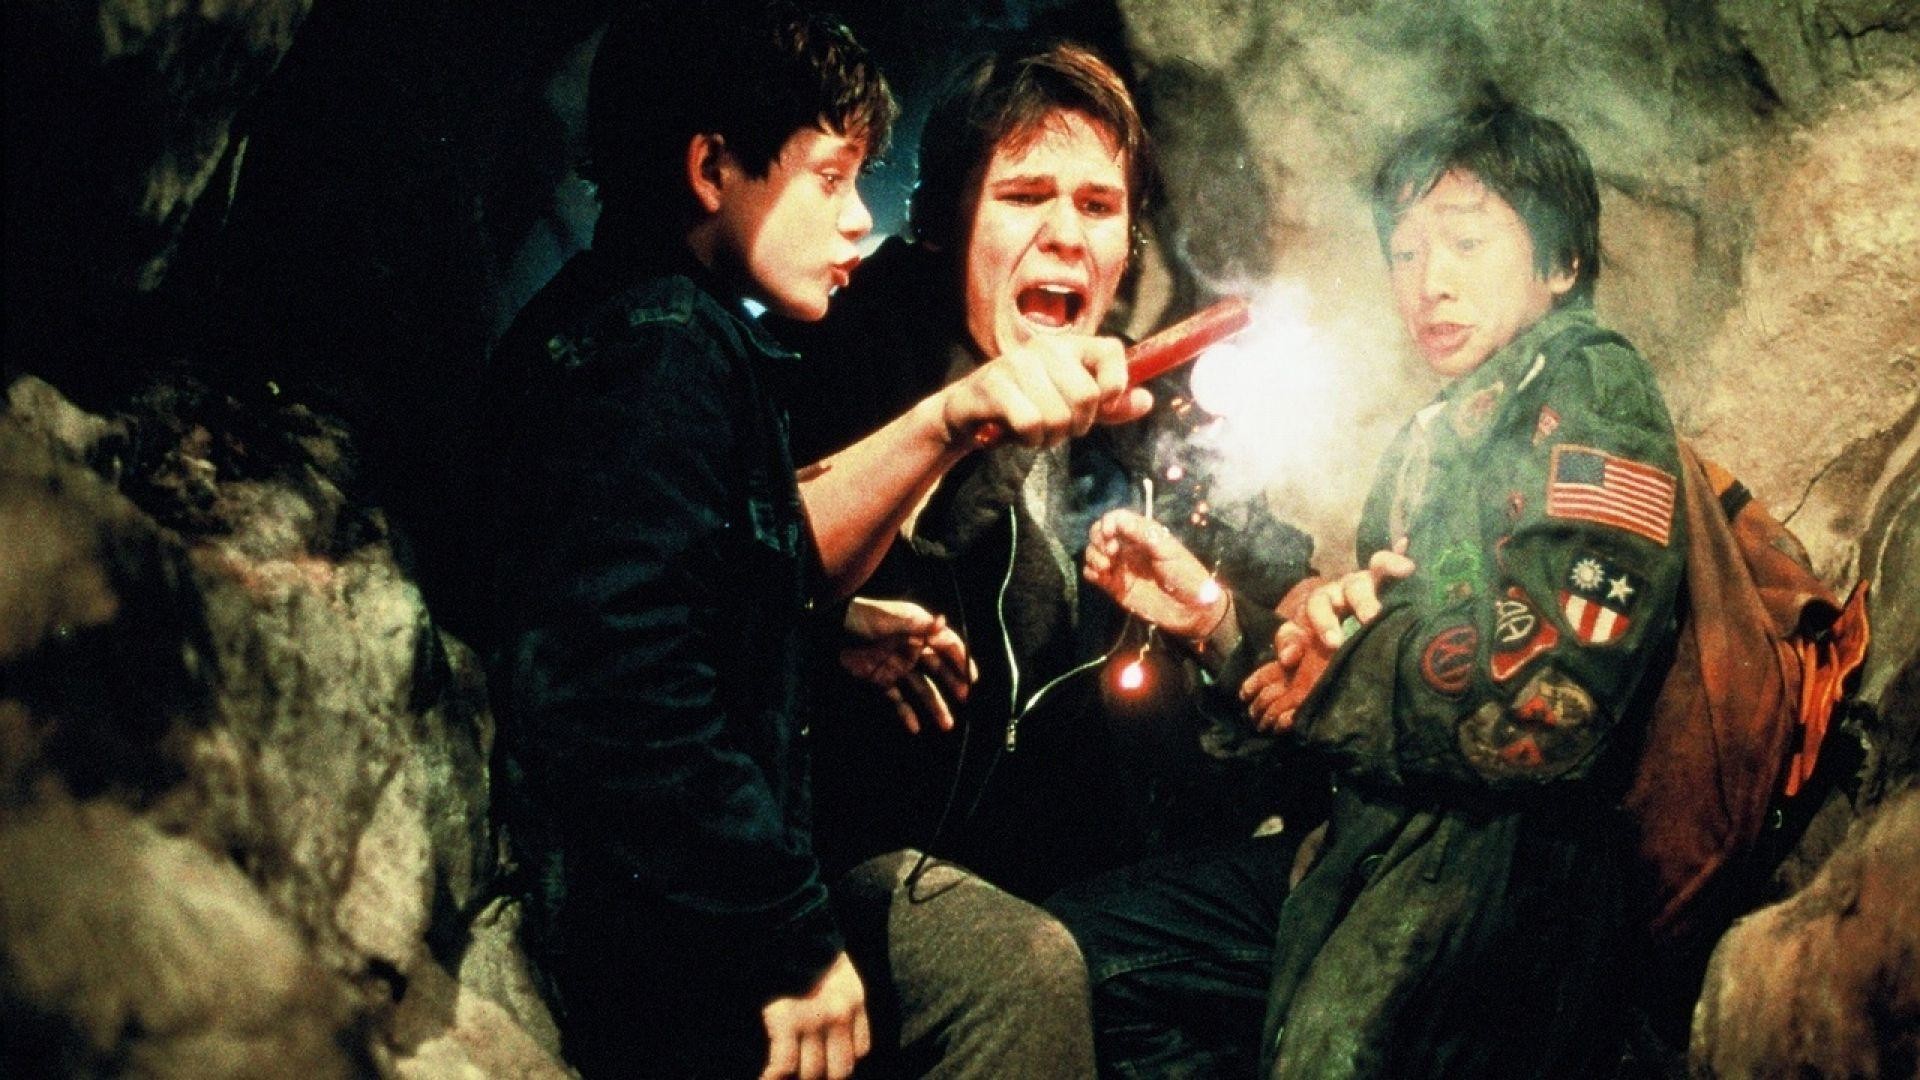 1920x1080 Union Films - Review - The Goonies